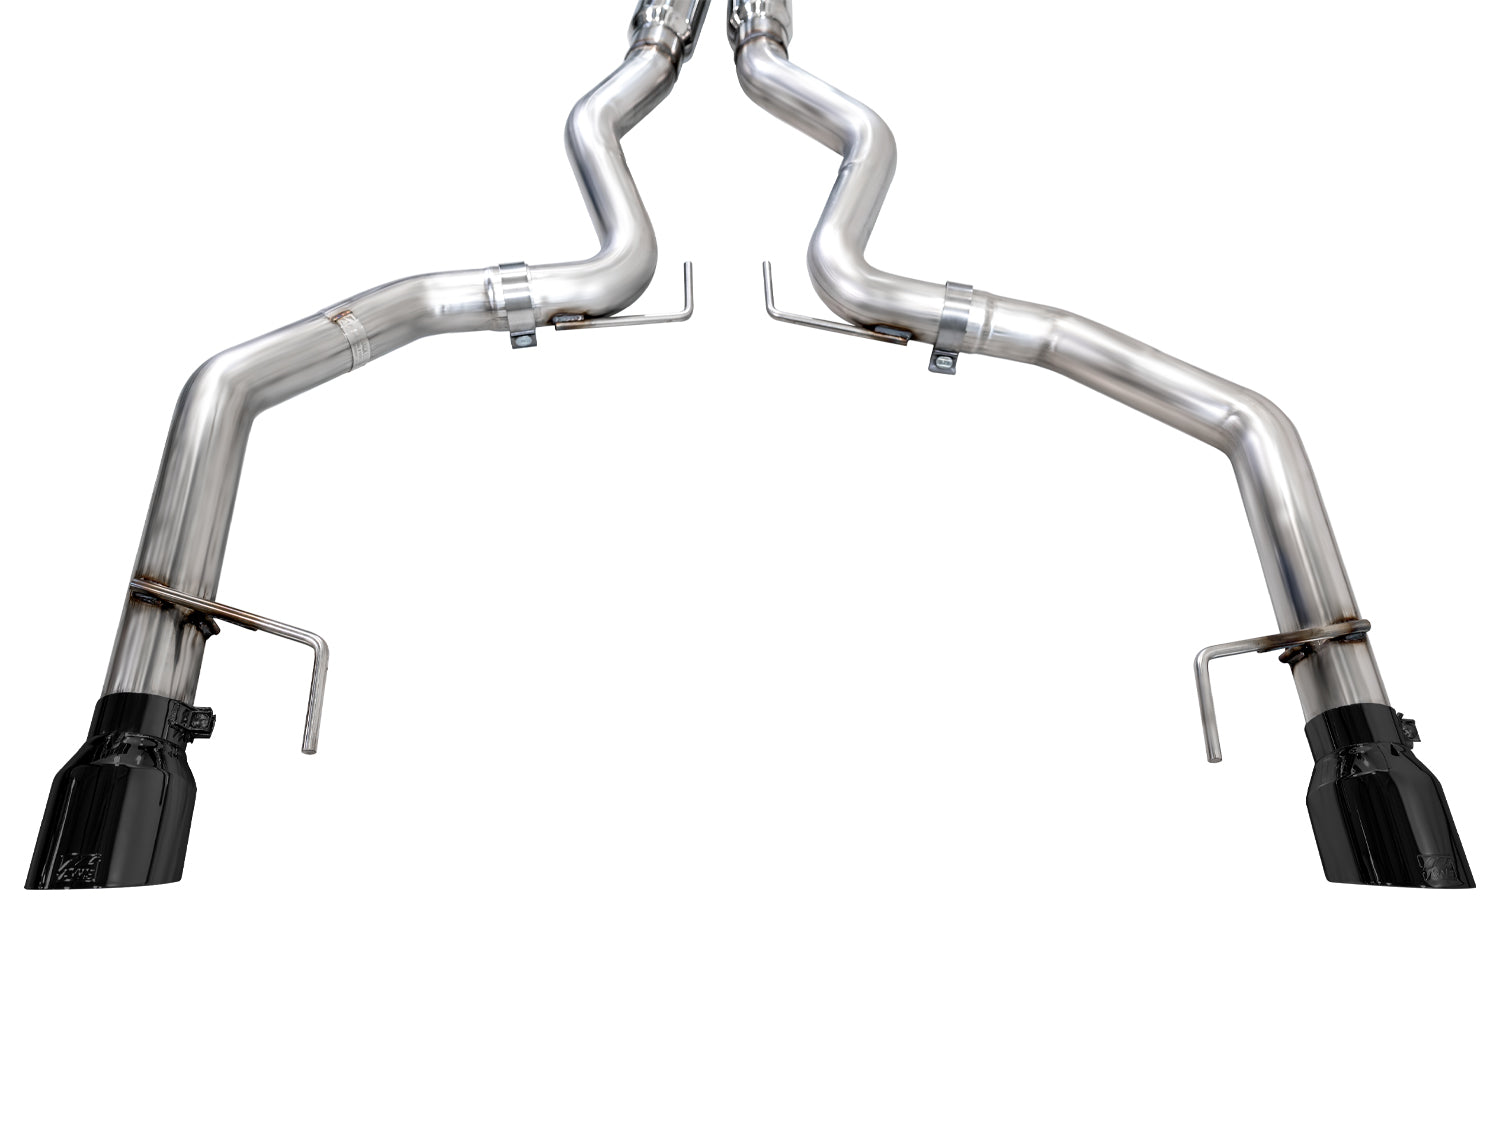 AWE EXHAUST SUITE FOR S650 MUSTANG DUAL TIP GT